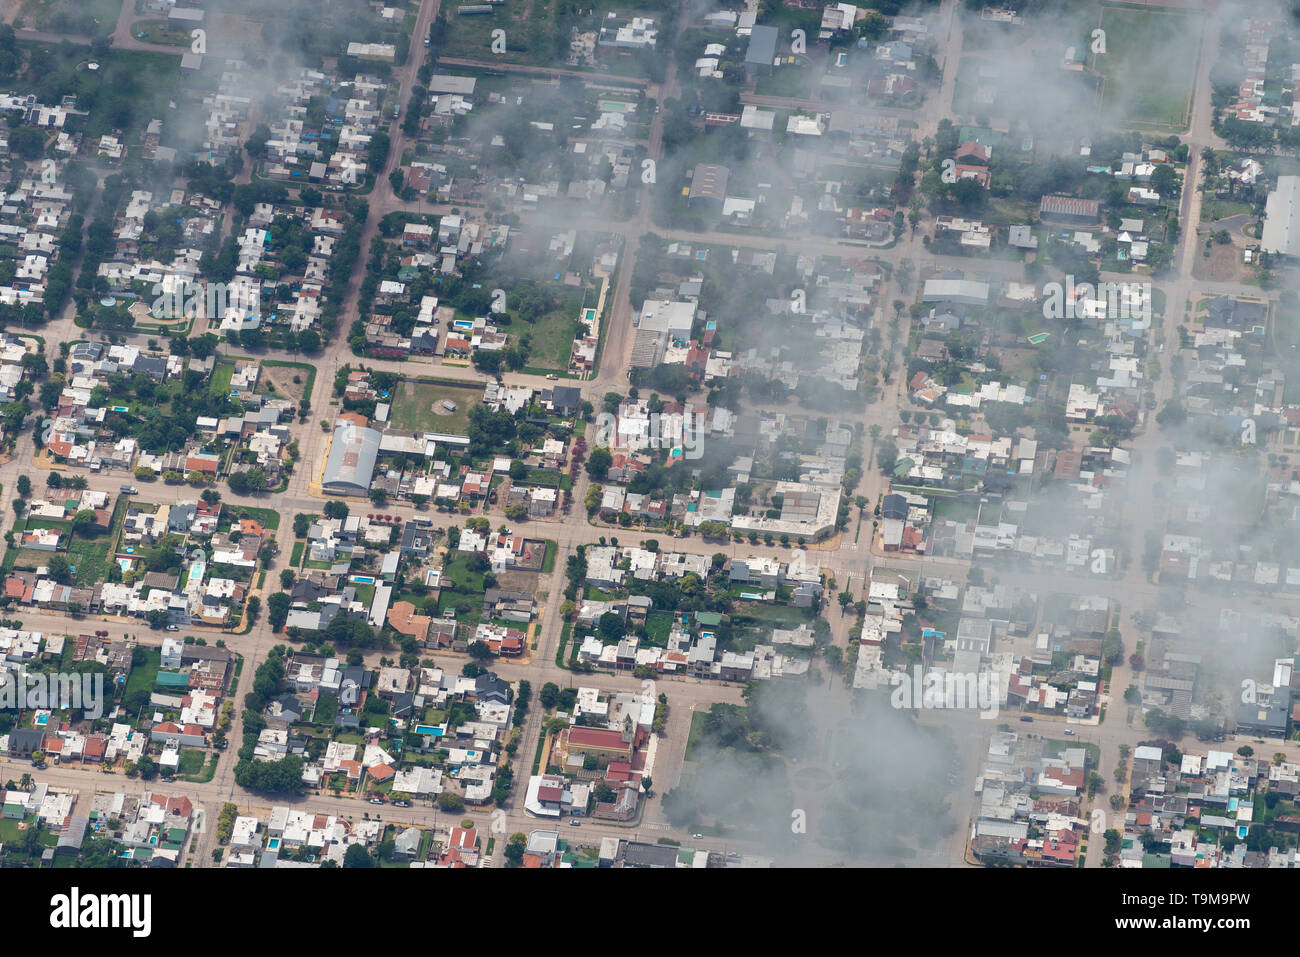 Aerial image showing neighbourhoods in the city of Rosario, Argentina Stock Photo